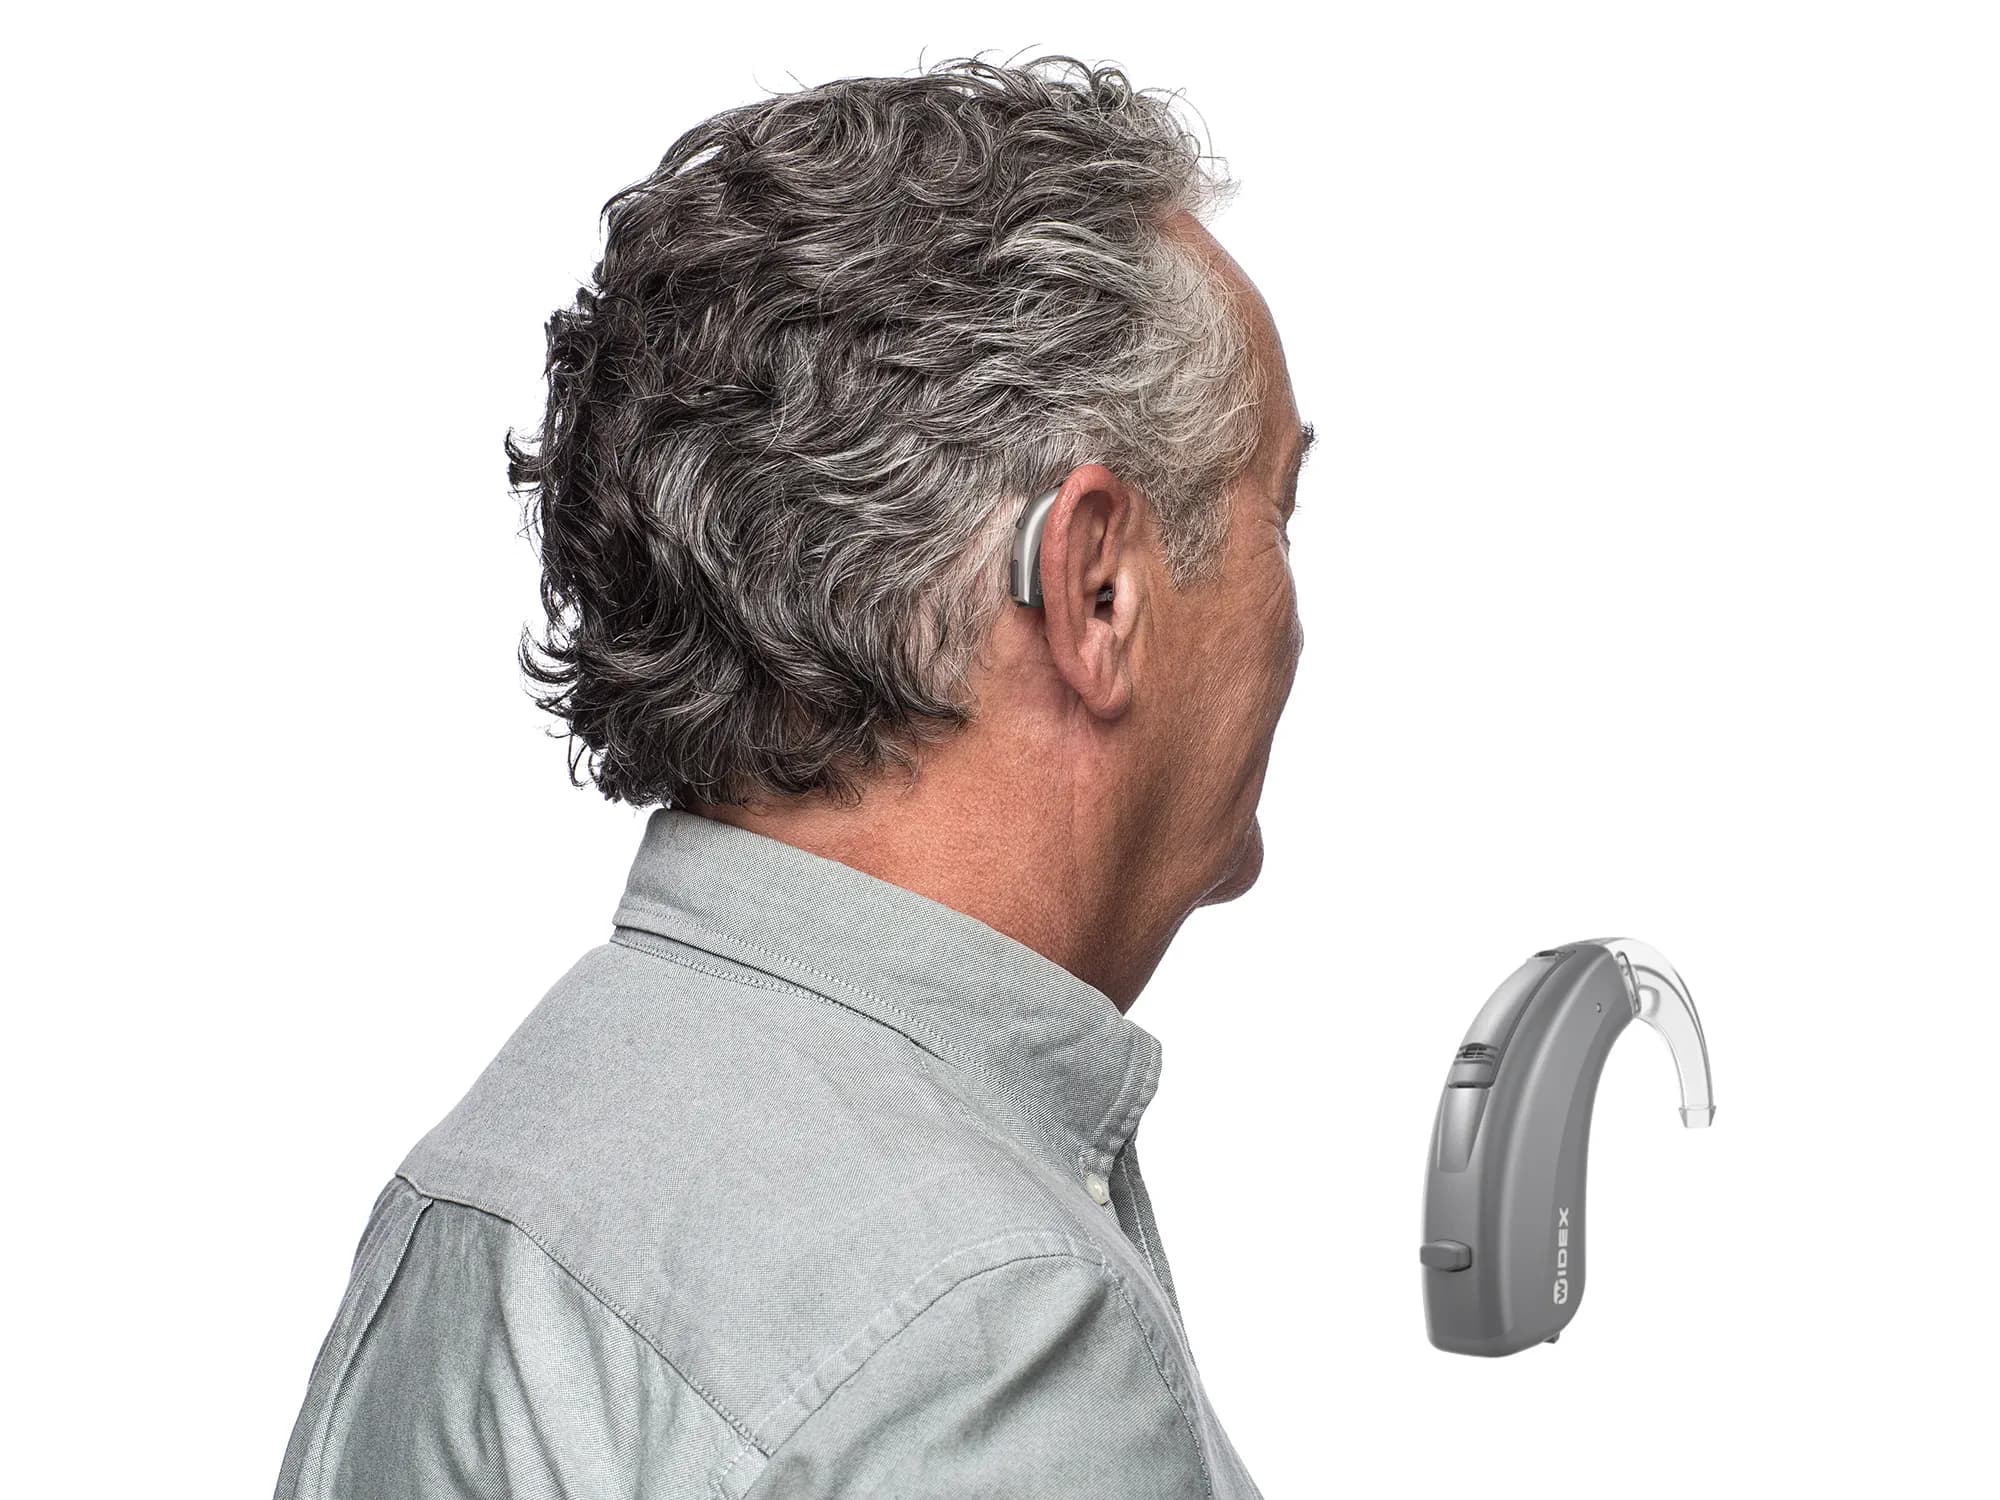 Widex bte behind-the-ear hearing aid worn on the ear to show how discreet it is